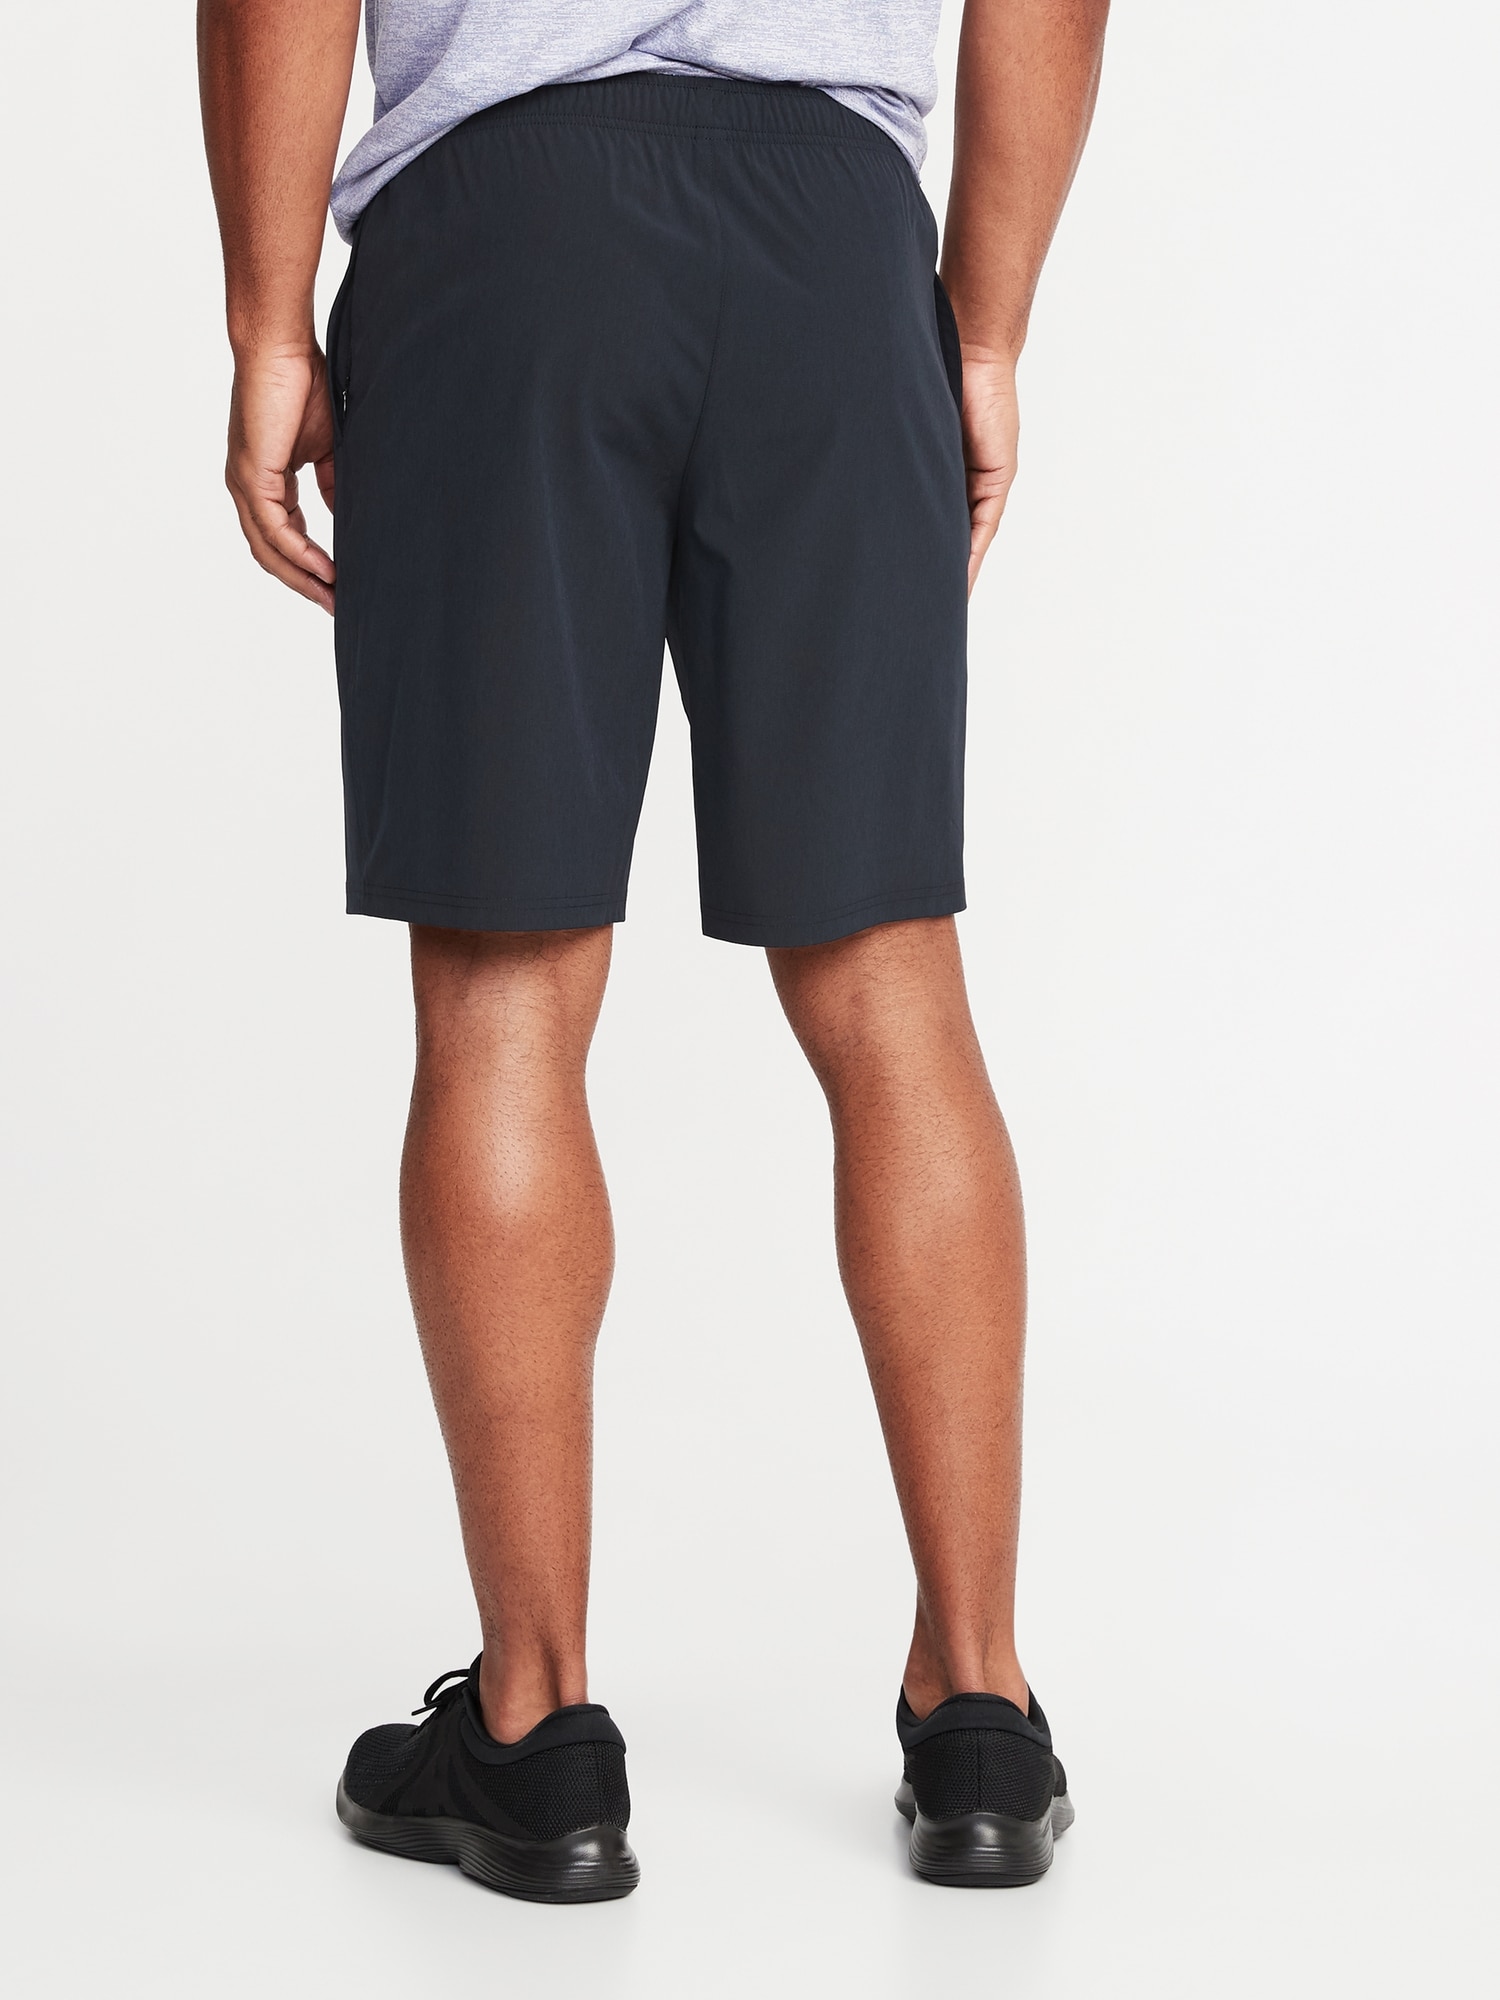 Ripstop Hybrid Performance Shorts for Men - 9-inch inseam | Old Navy